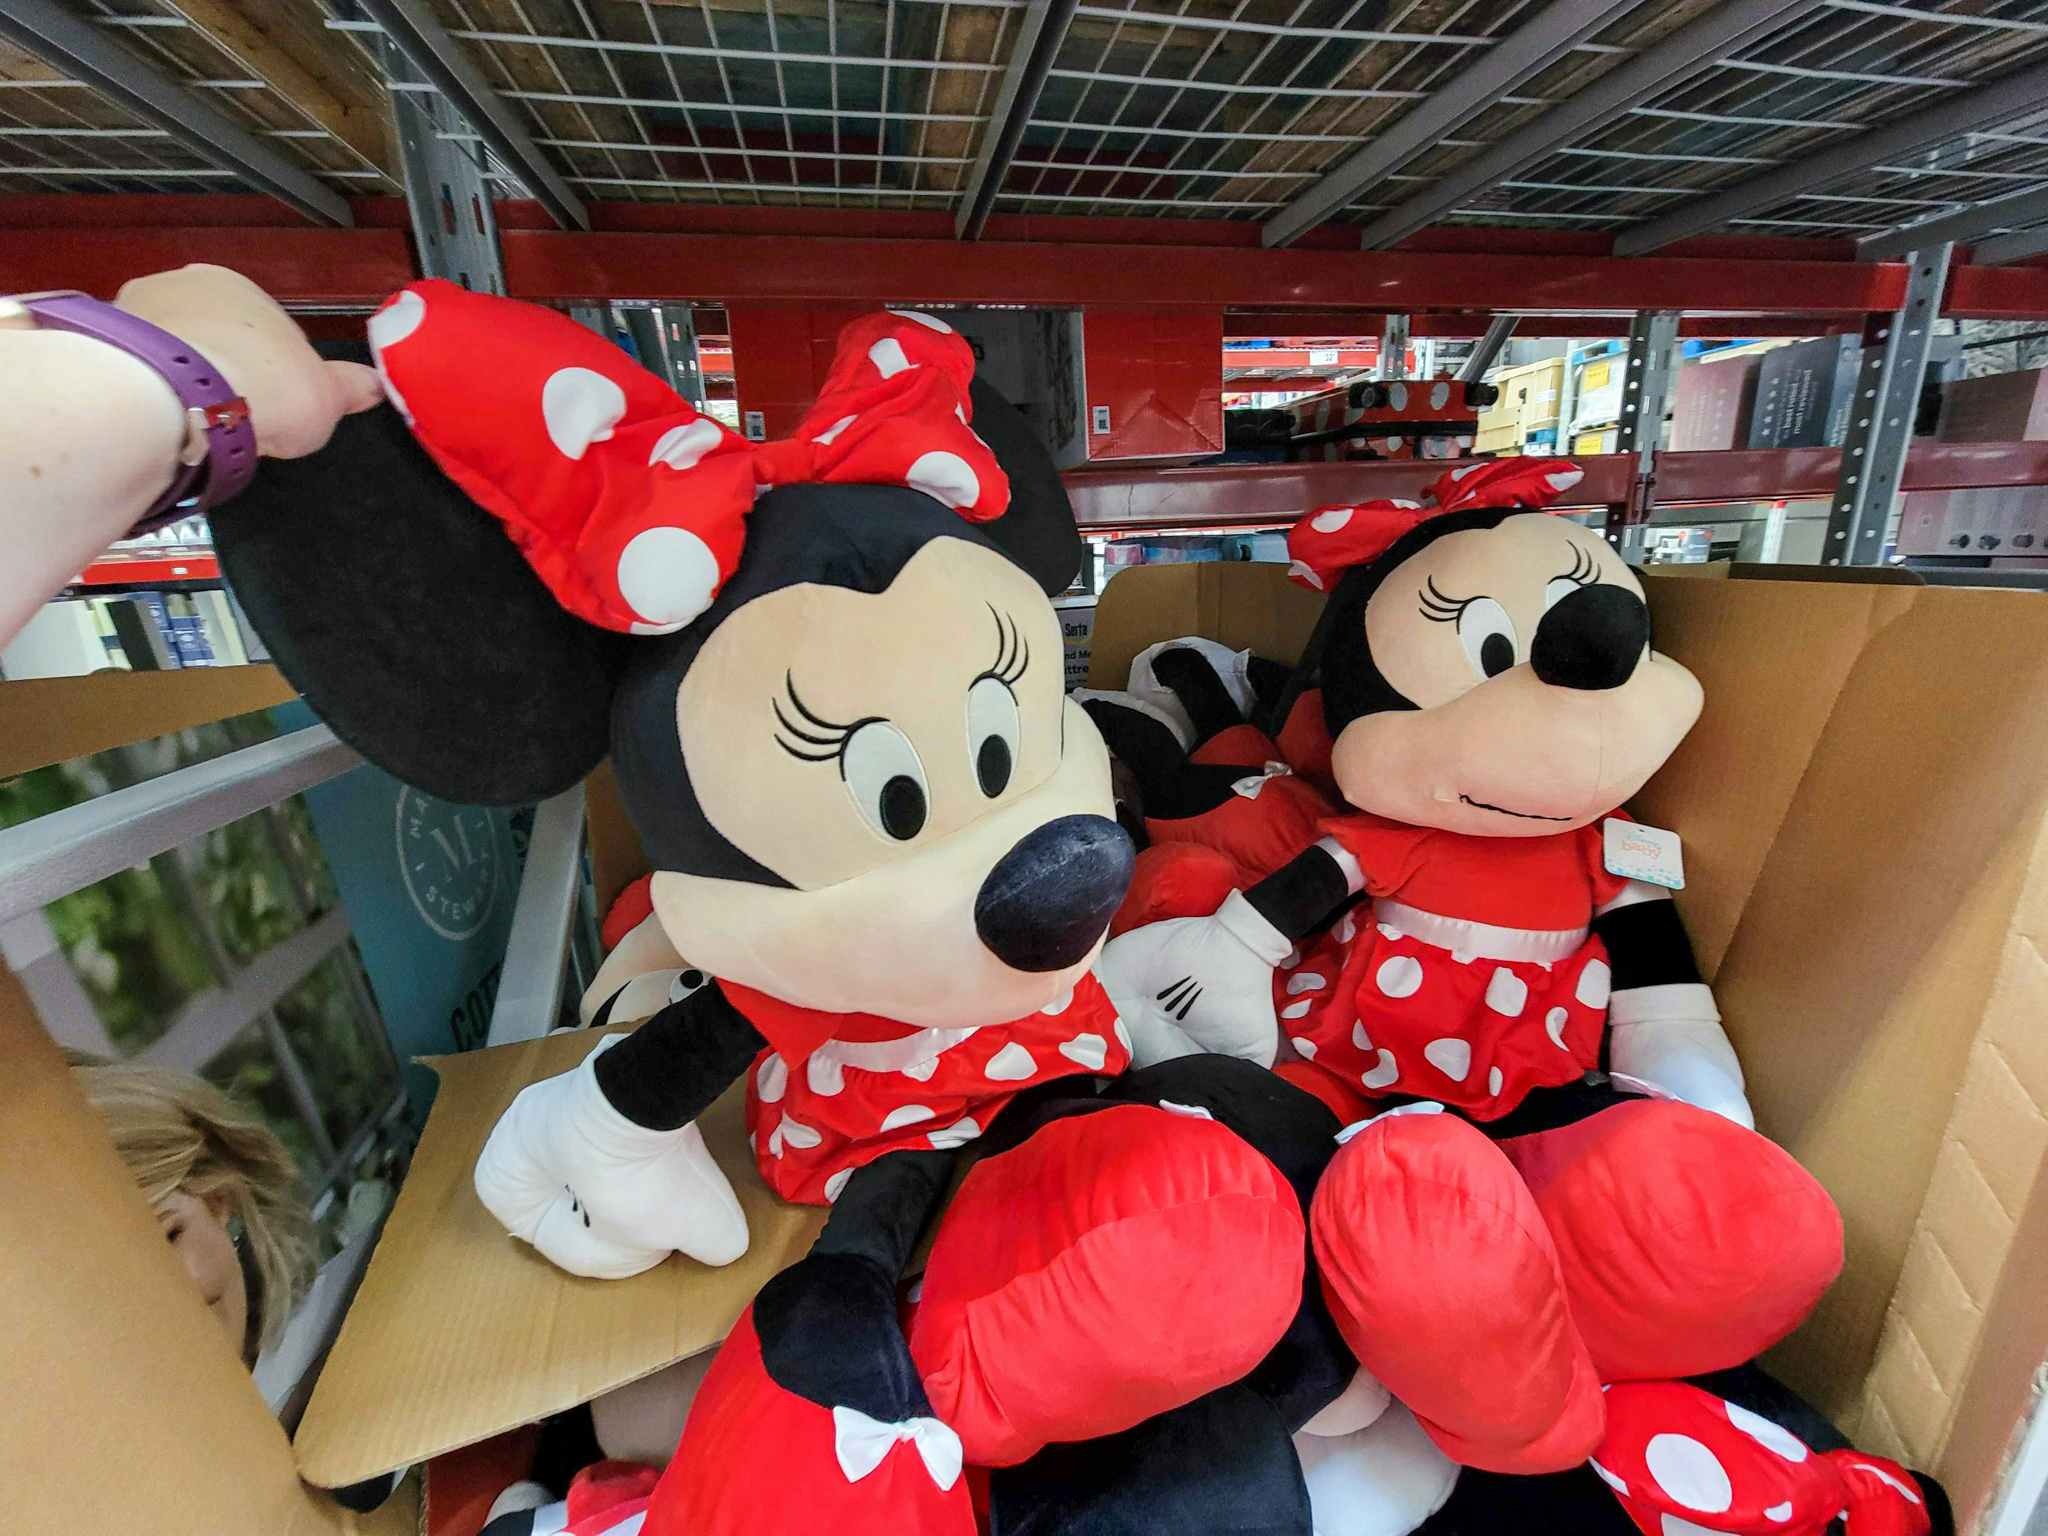 40-inch tall minnie mouse plushes in a box